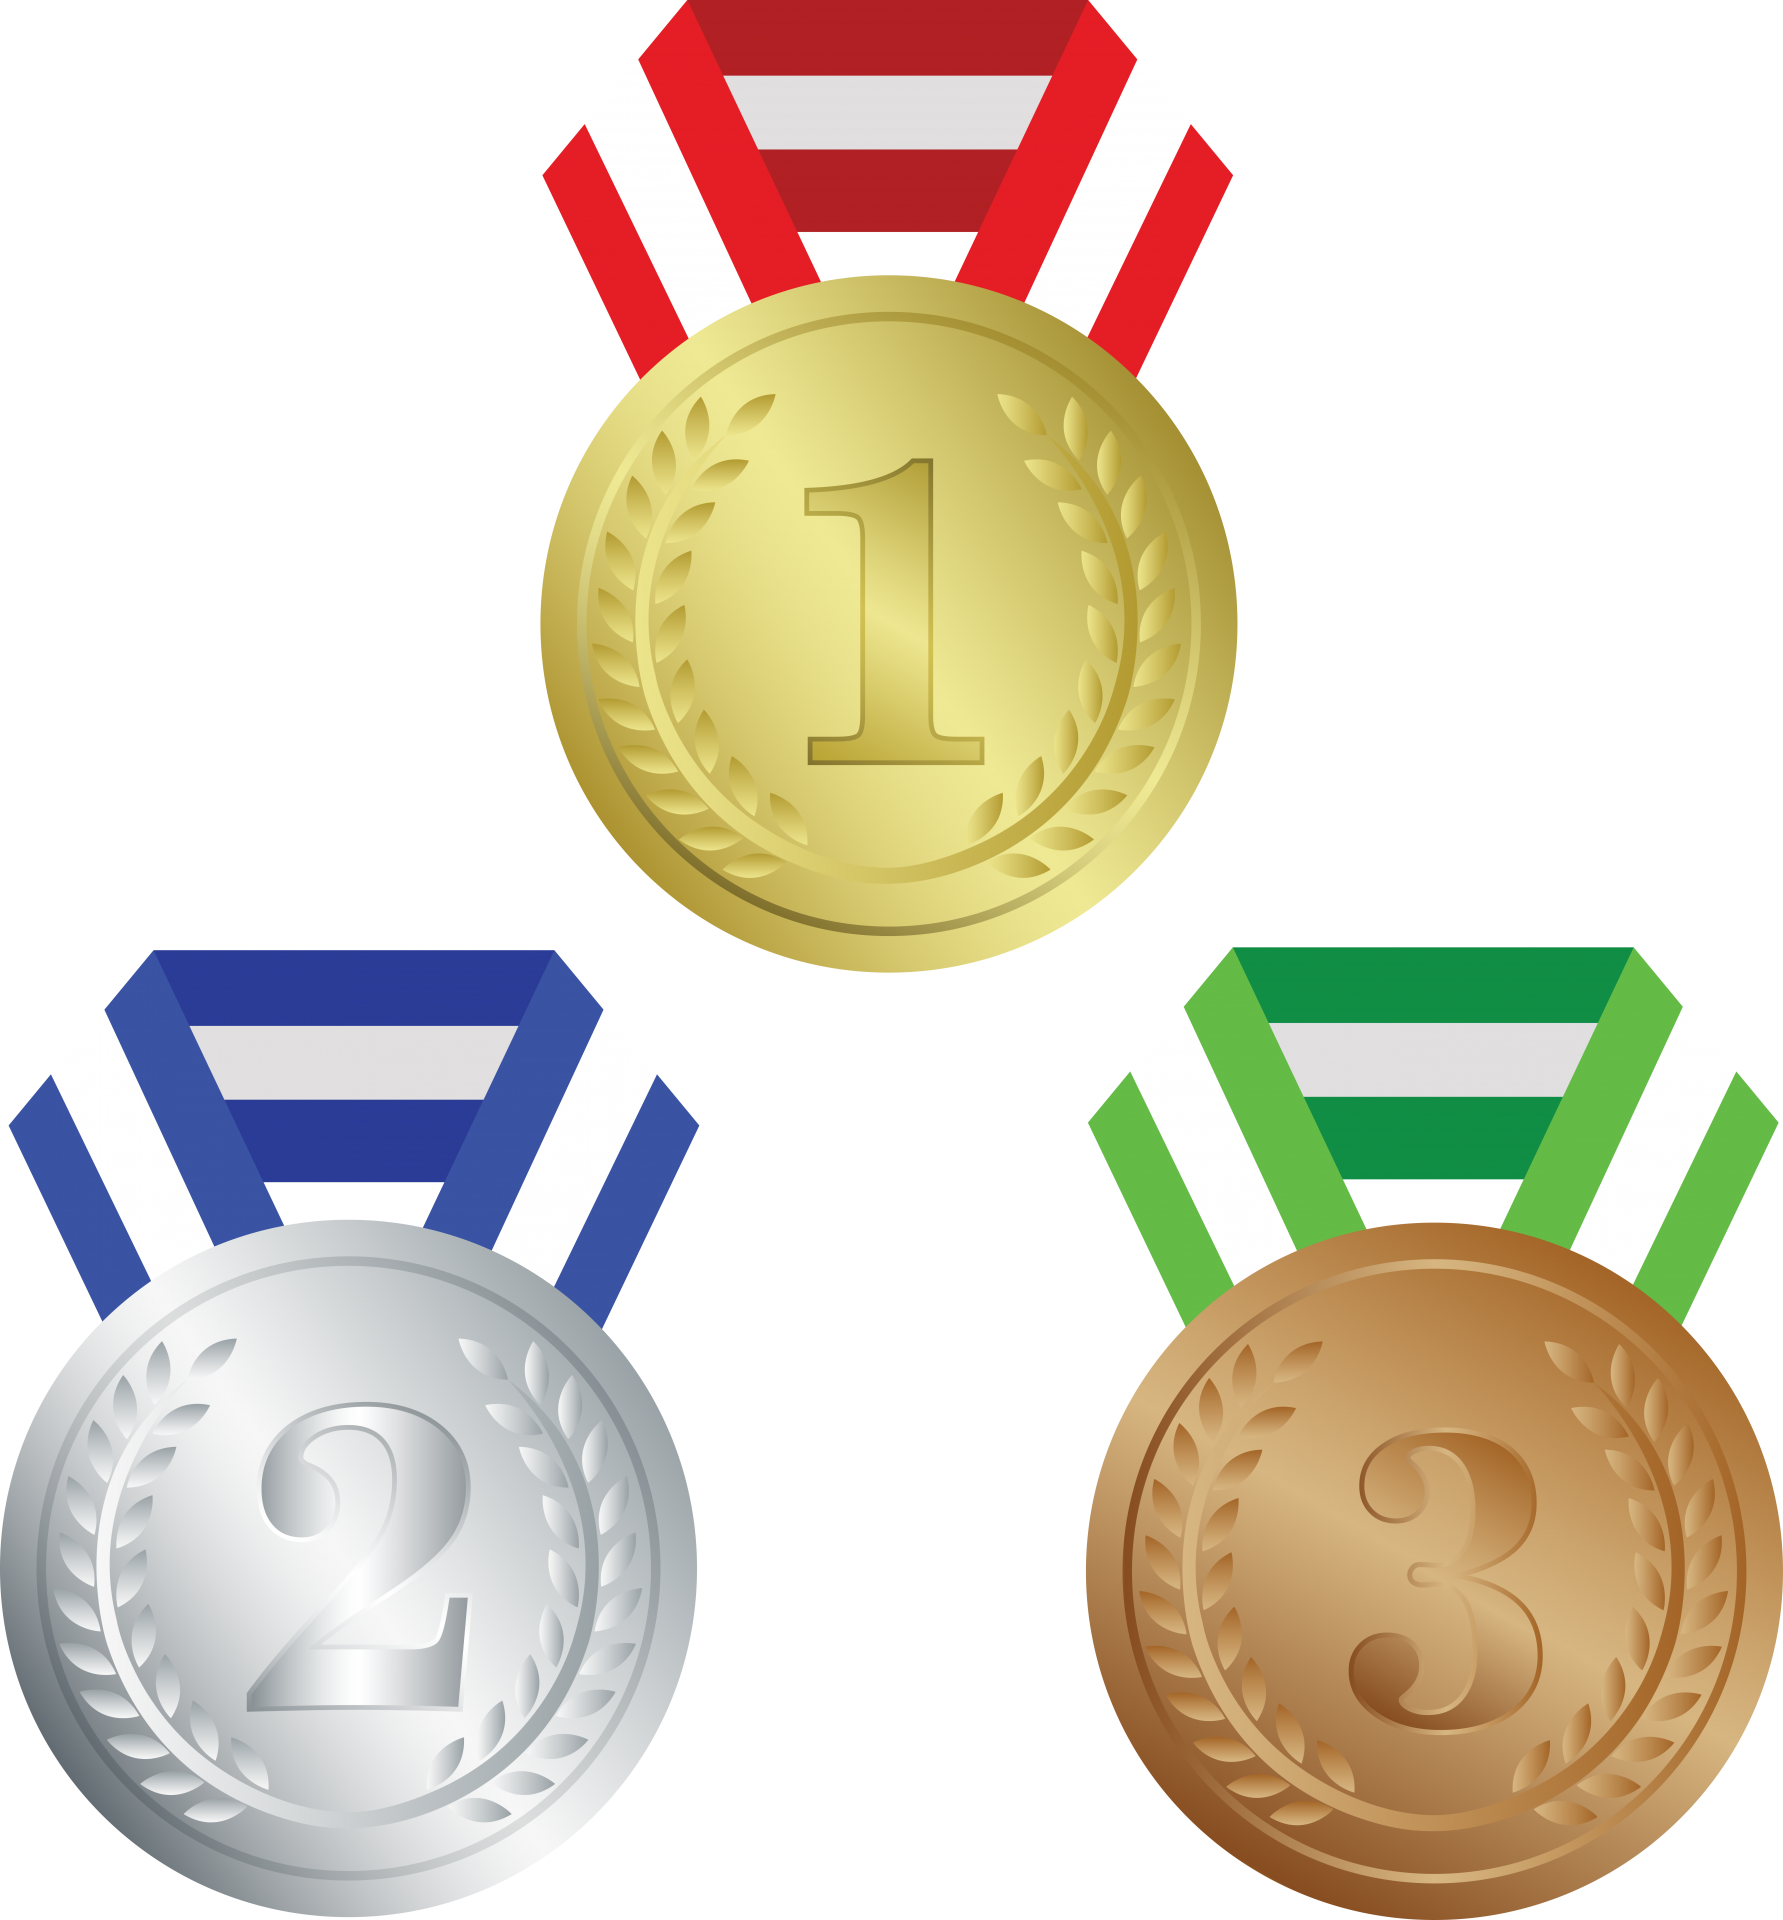 Set of gold, silver and bronze medals